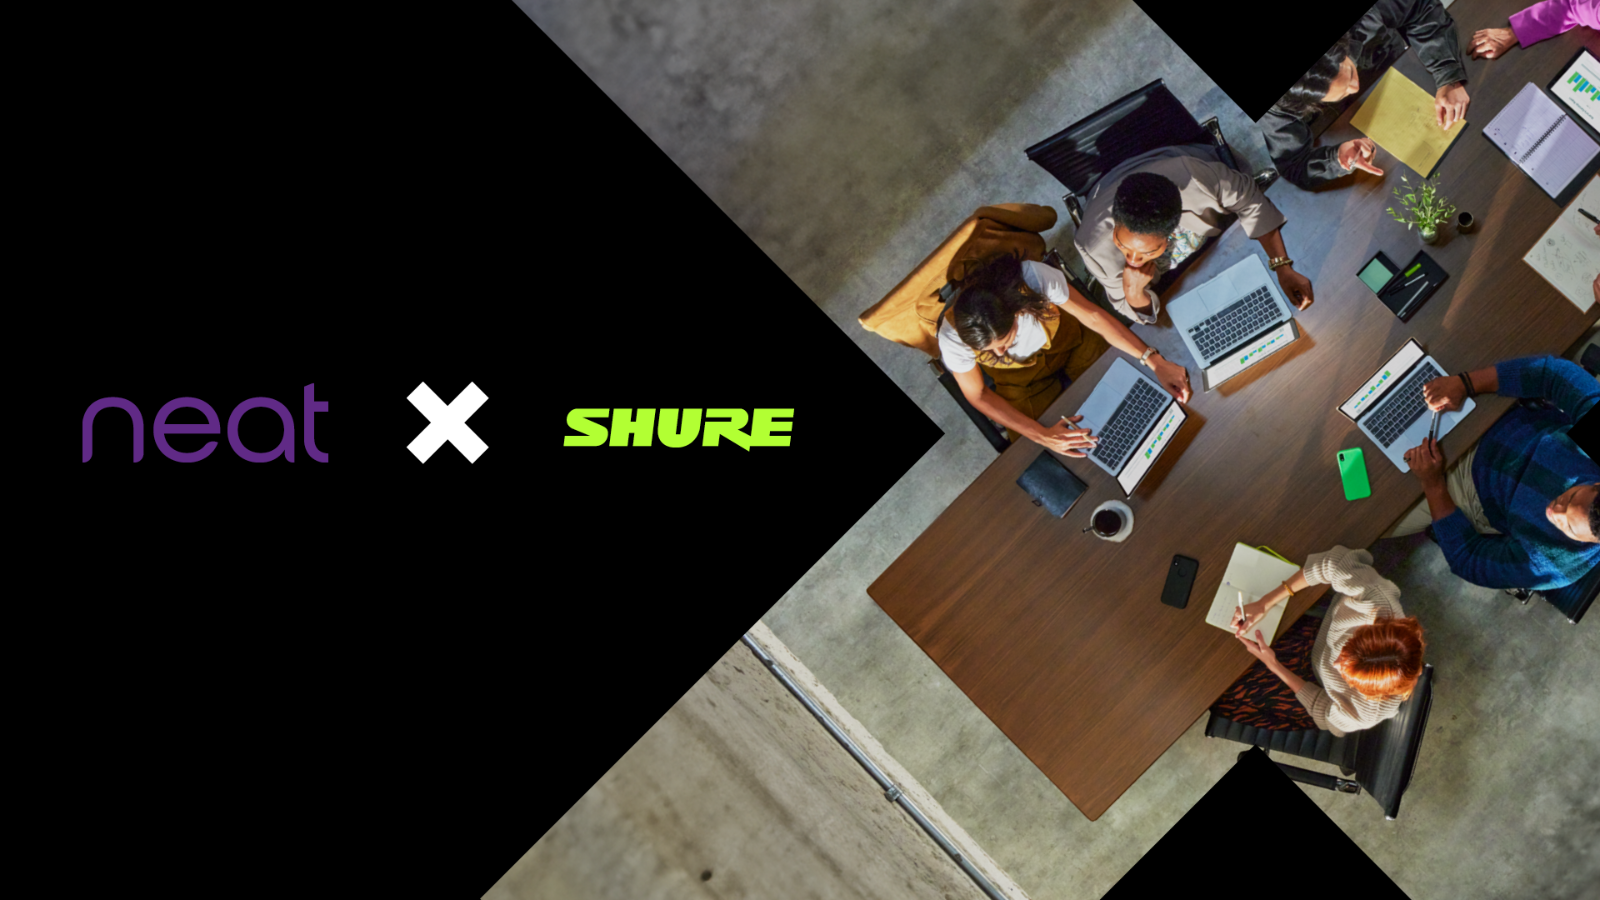 Shure and Neat Transform the Meeting Experience for Complex Spaces